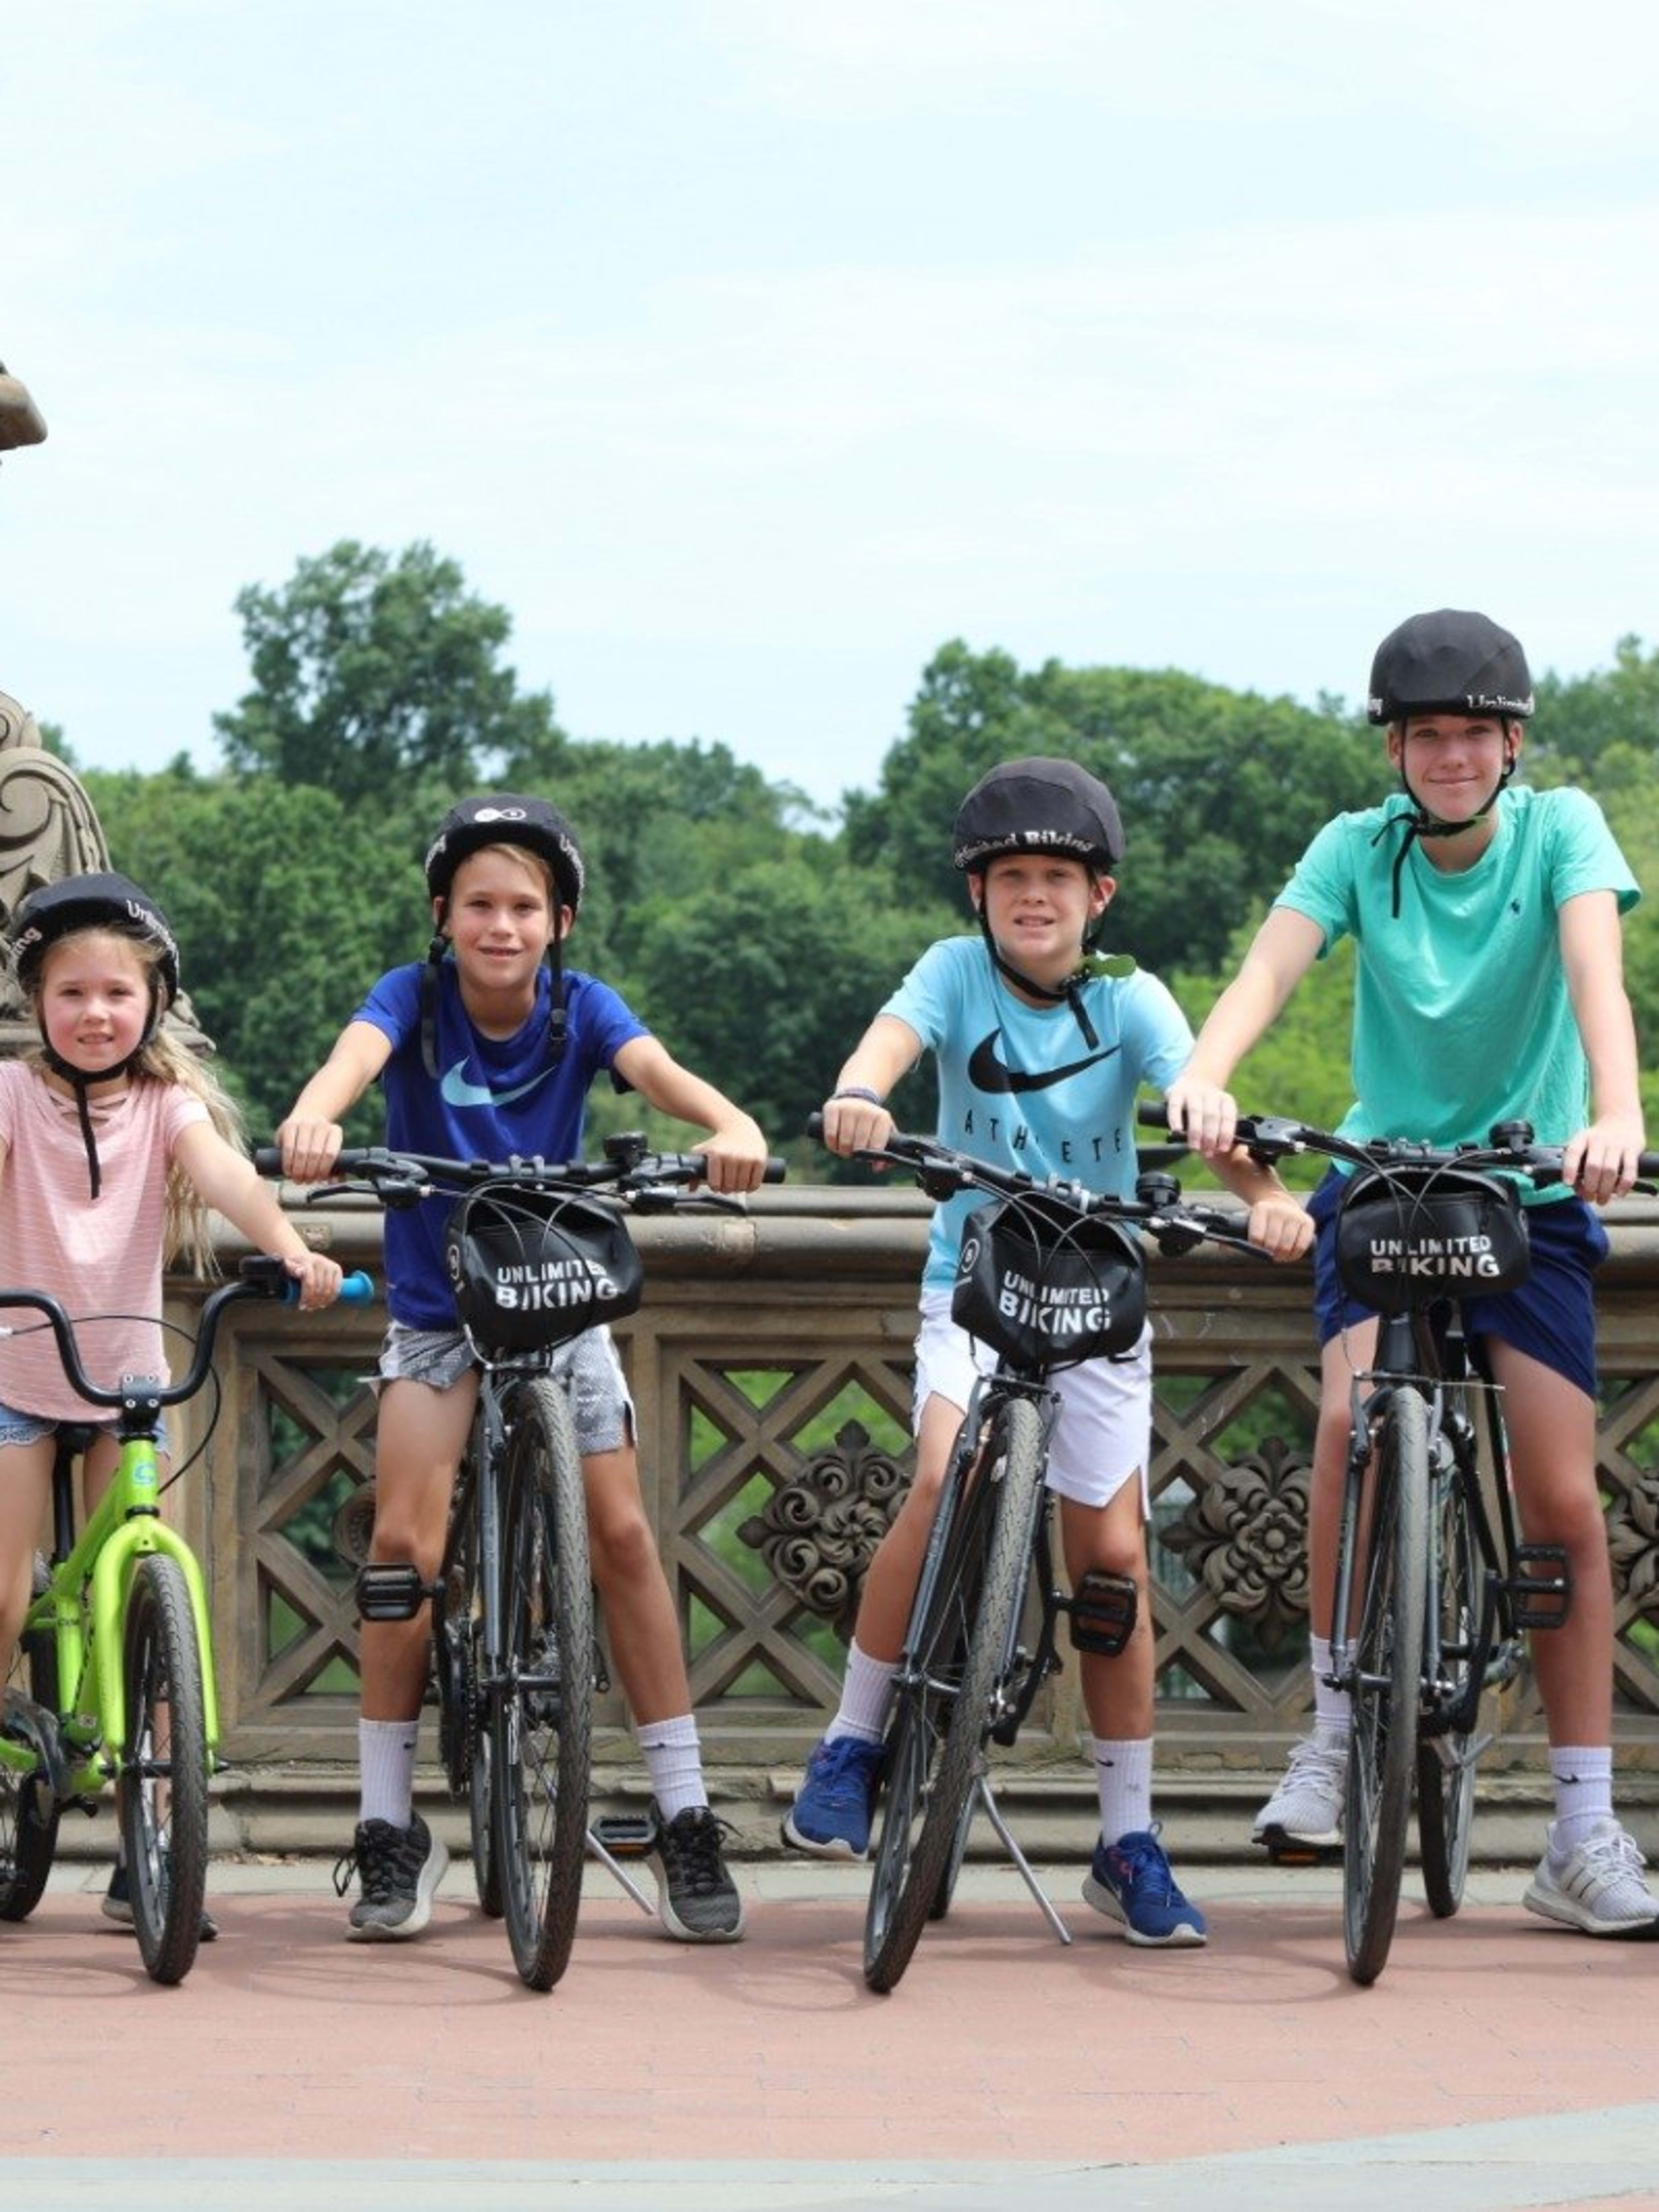 Central park cycling Tickets Discounts | New York Explorer Pass